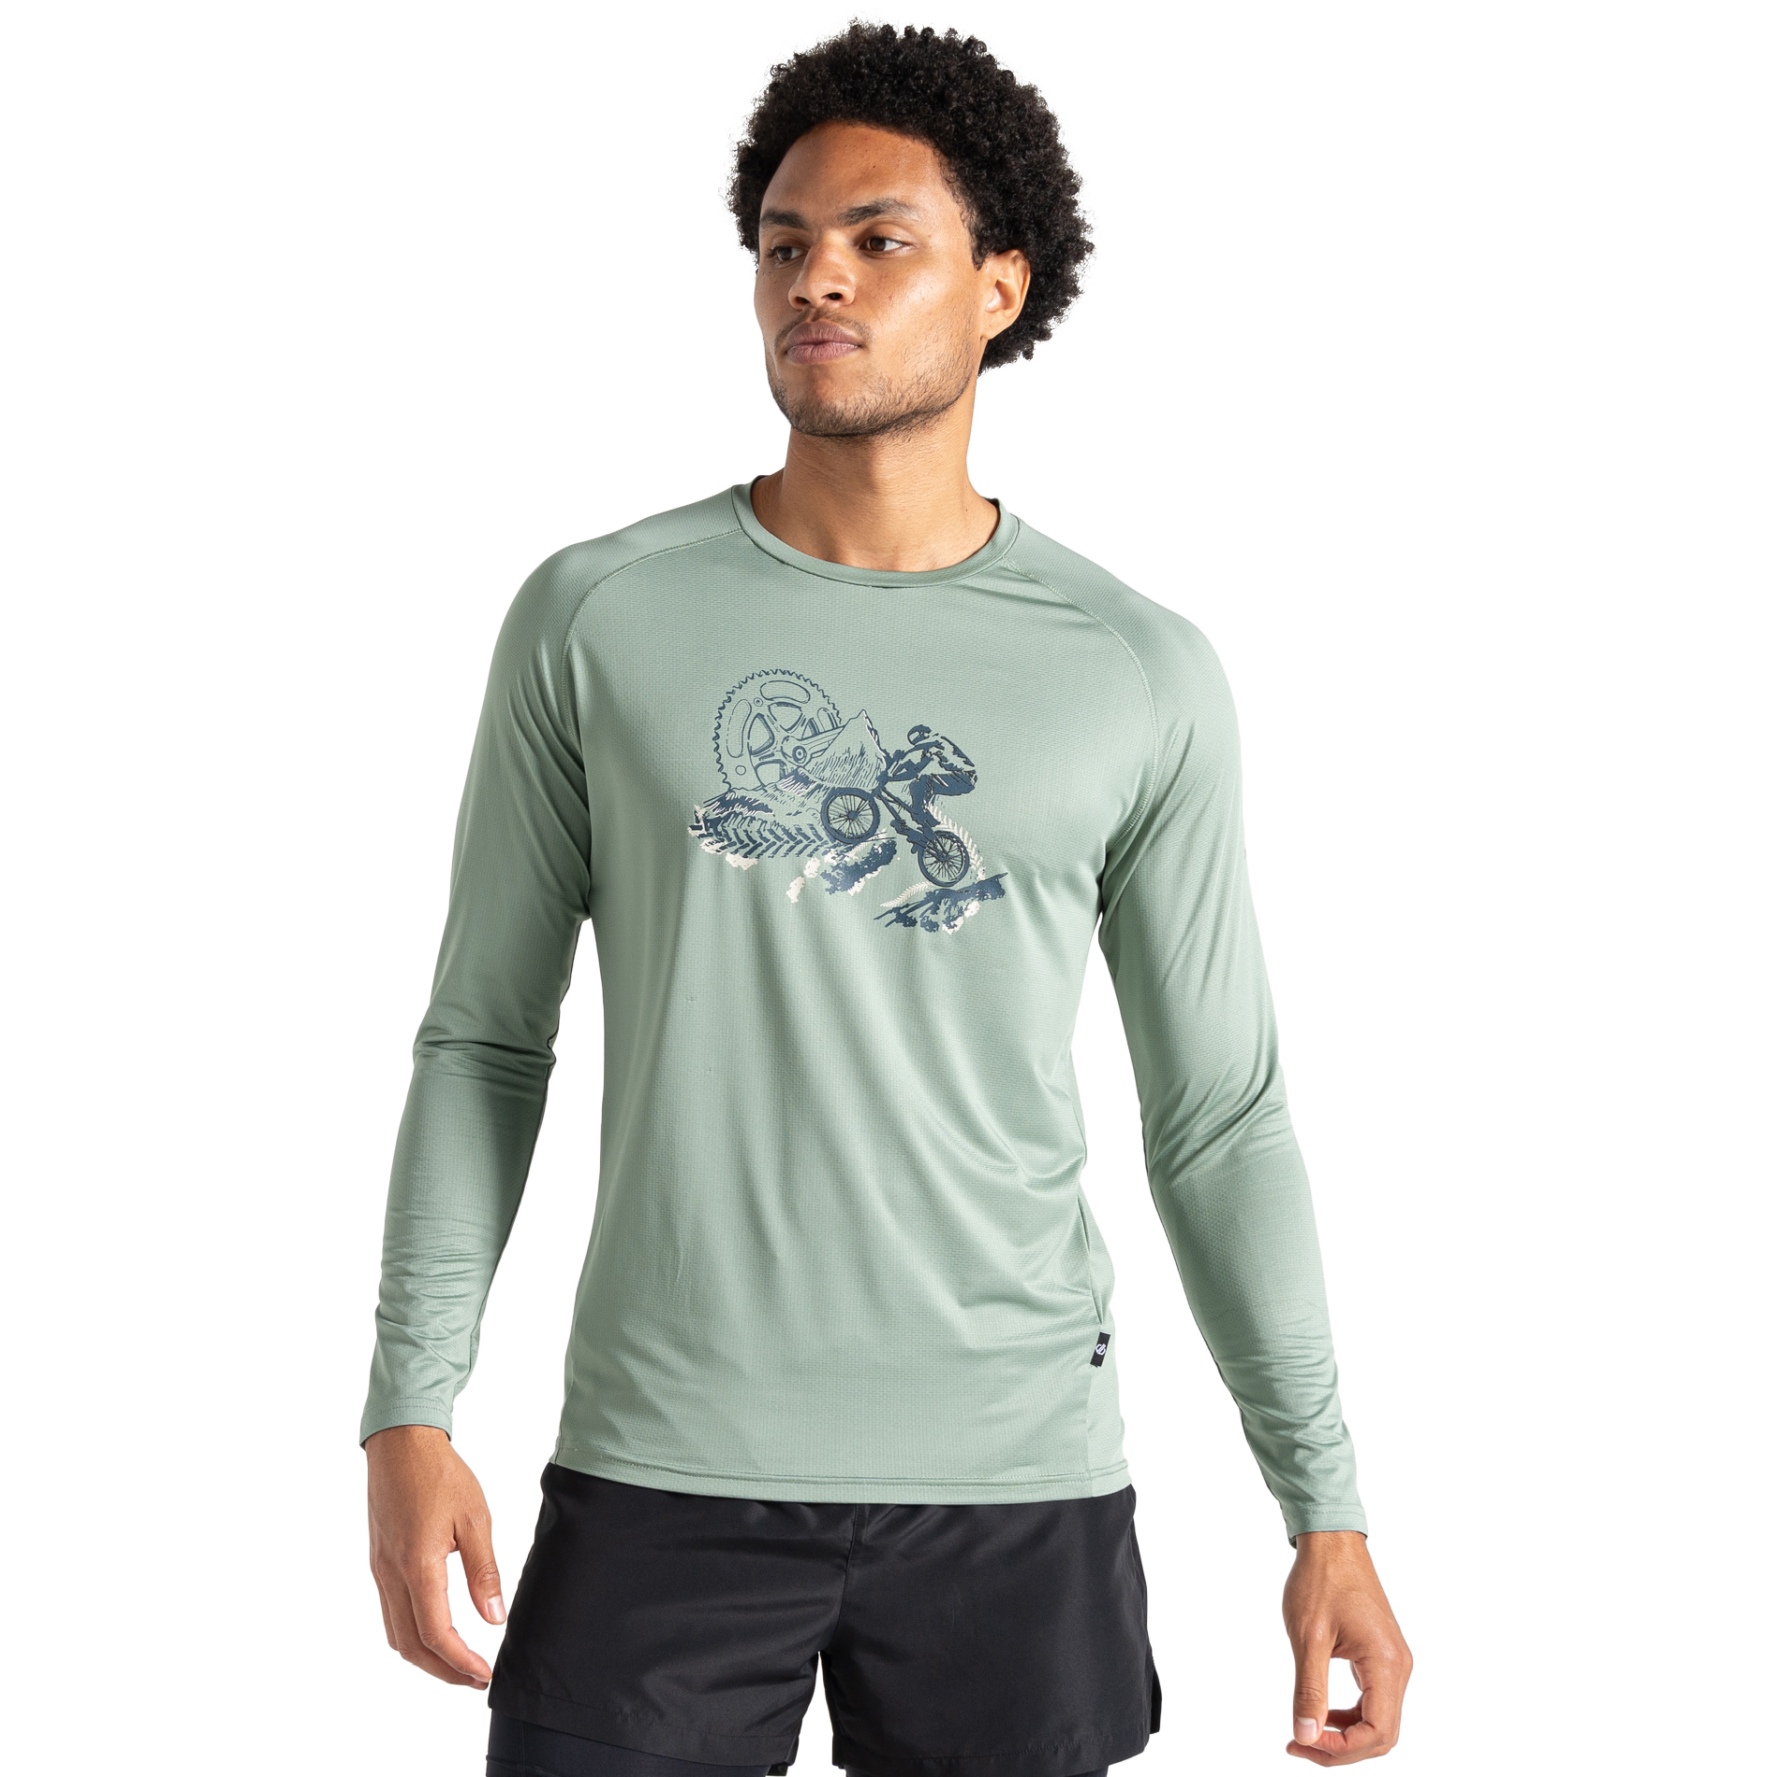 Picture of Dare 2b Tech Long Sleeve Tee Men - RHI Lily Pad